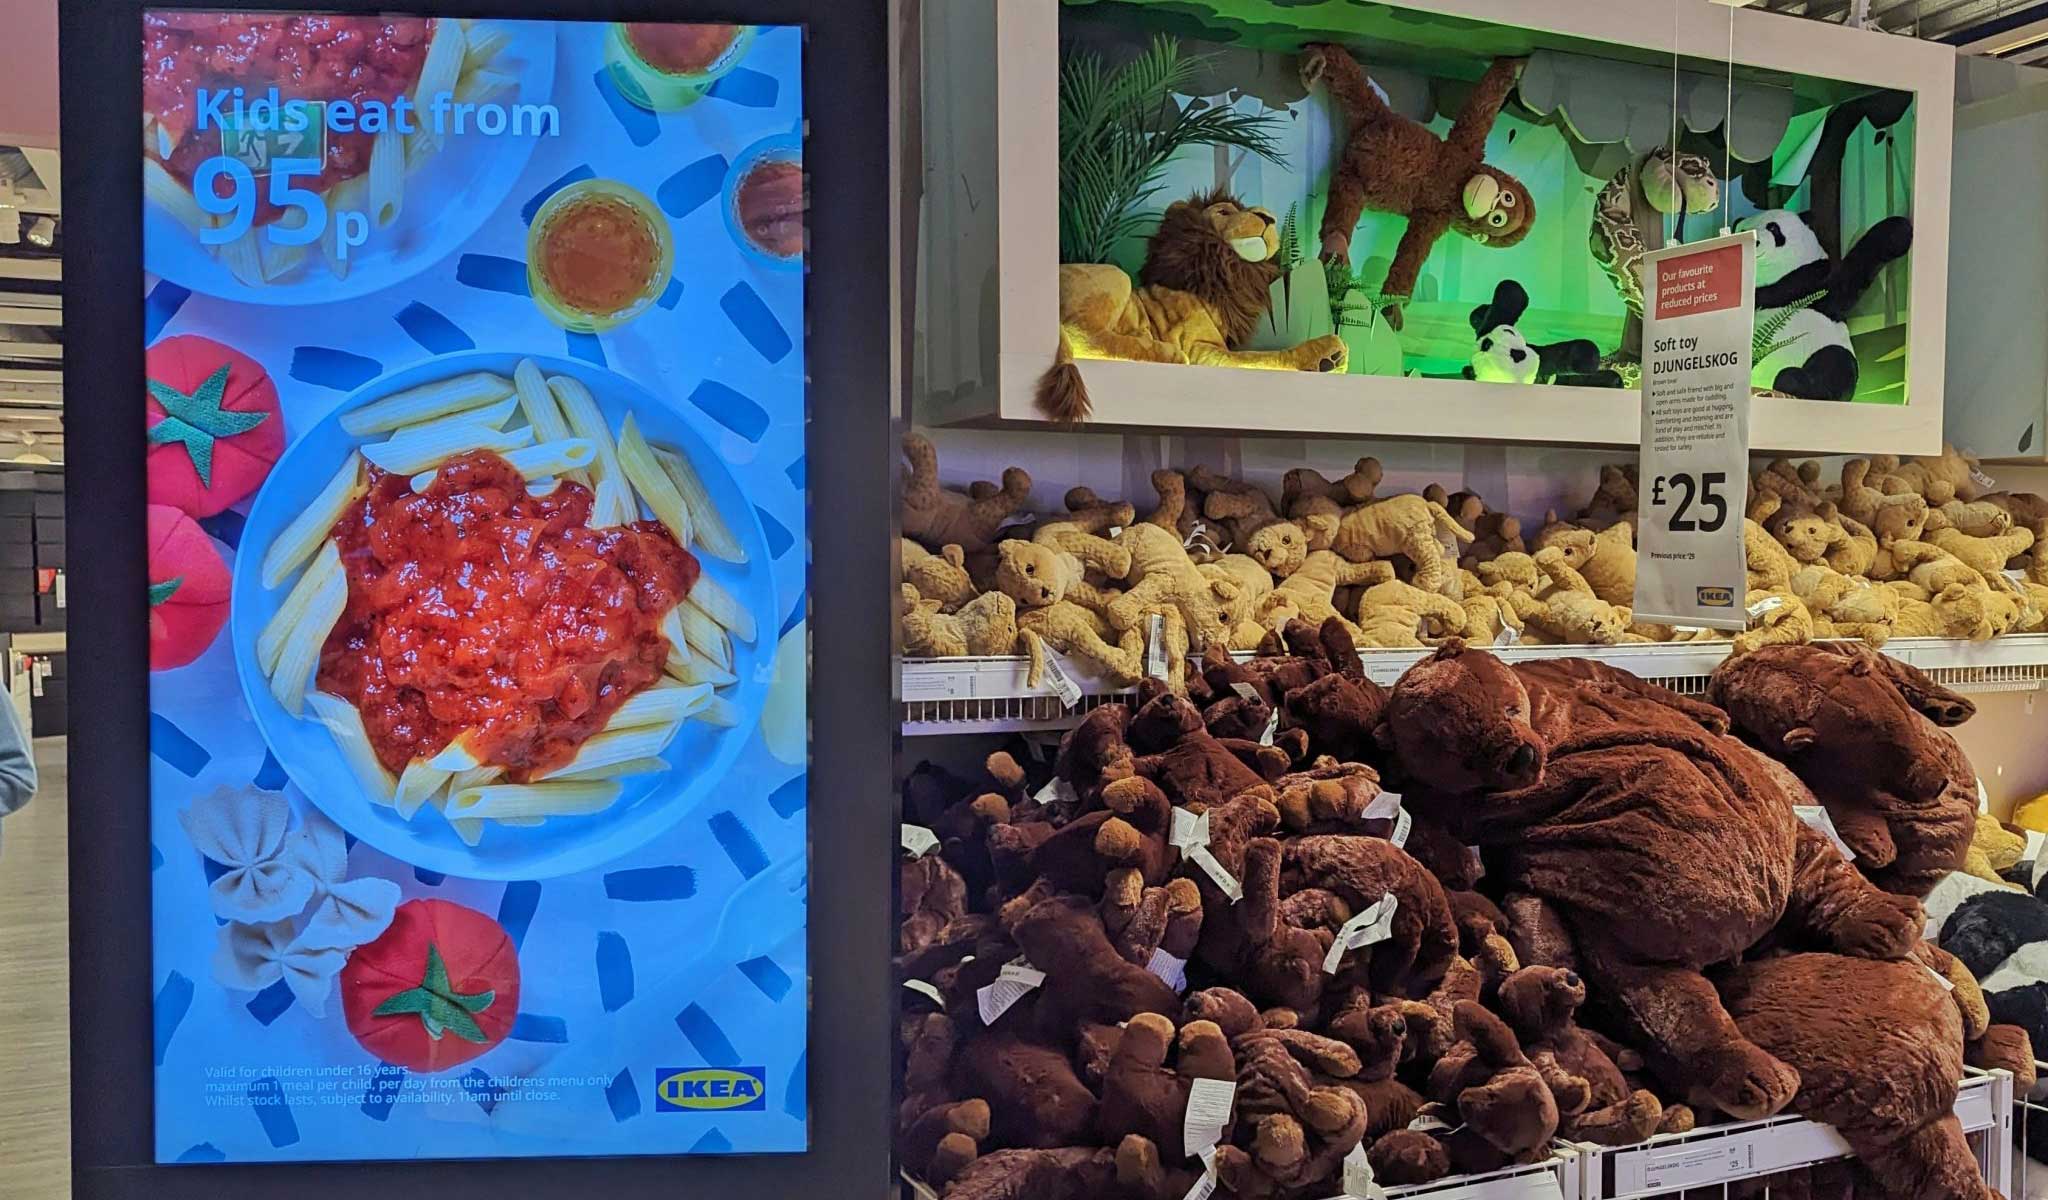 Kids meals in the restaurant are promoted on screen in the toy area